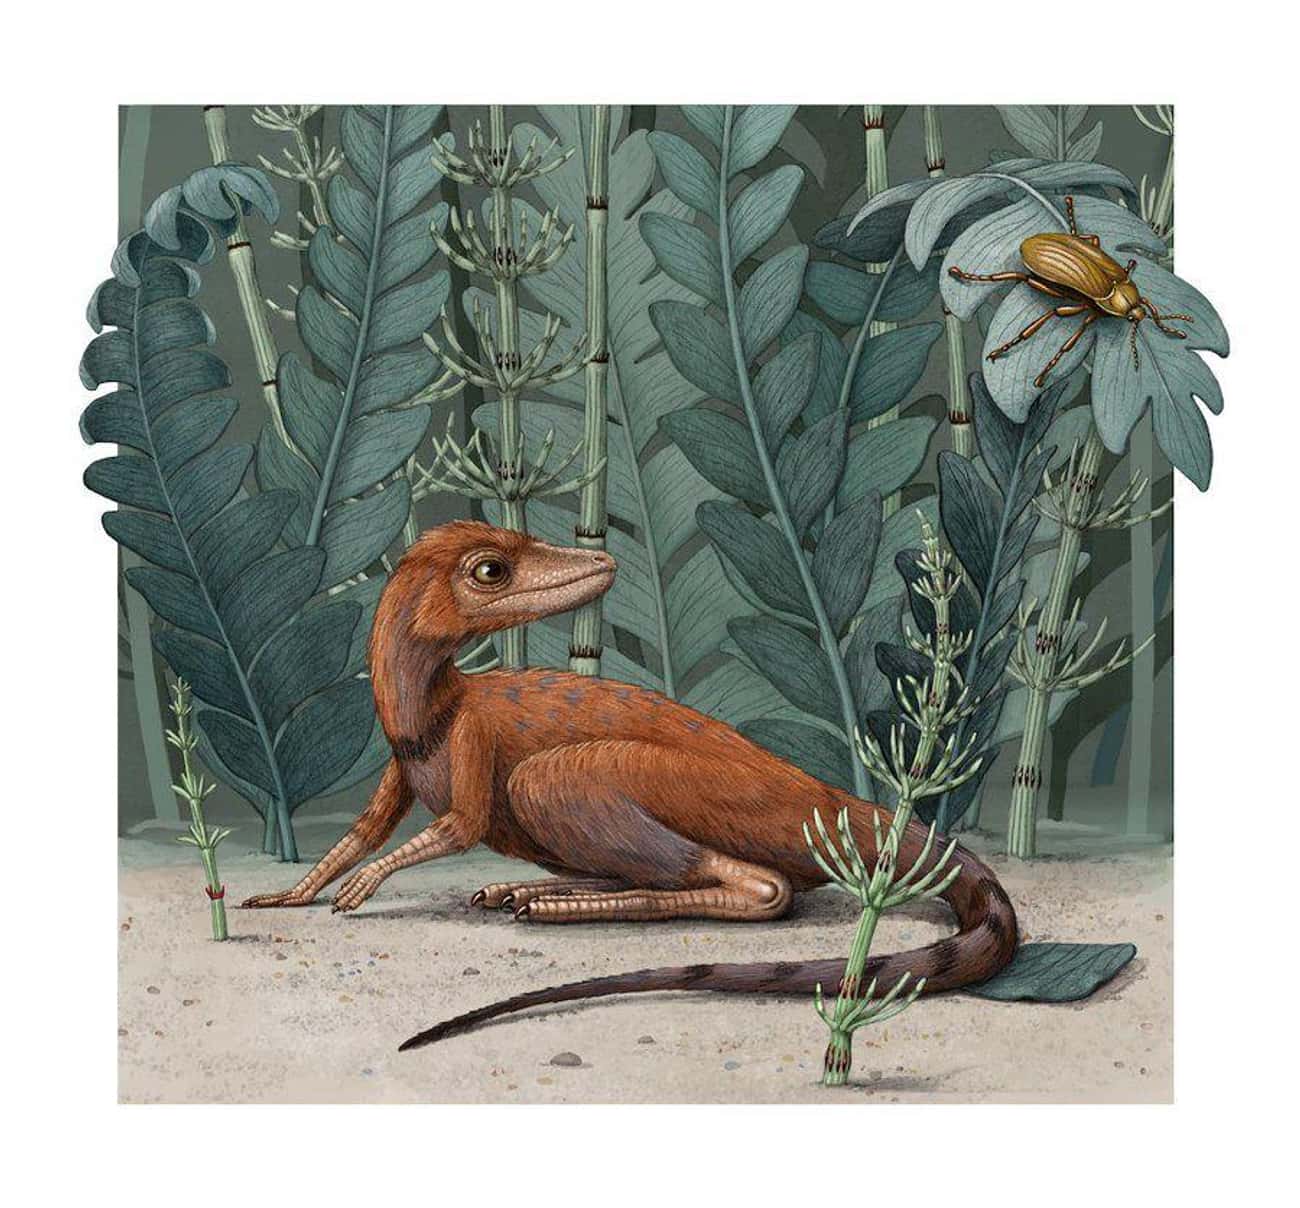 Dinosaurs Might Have Evolved From A 4-Inch-Tall Reptile